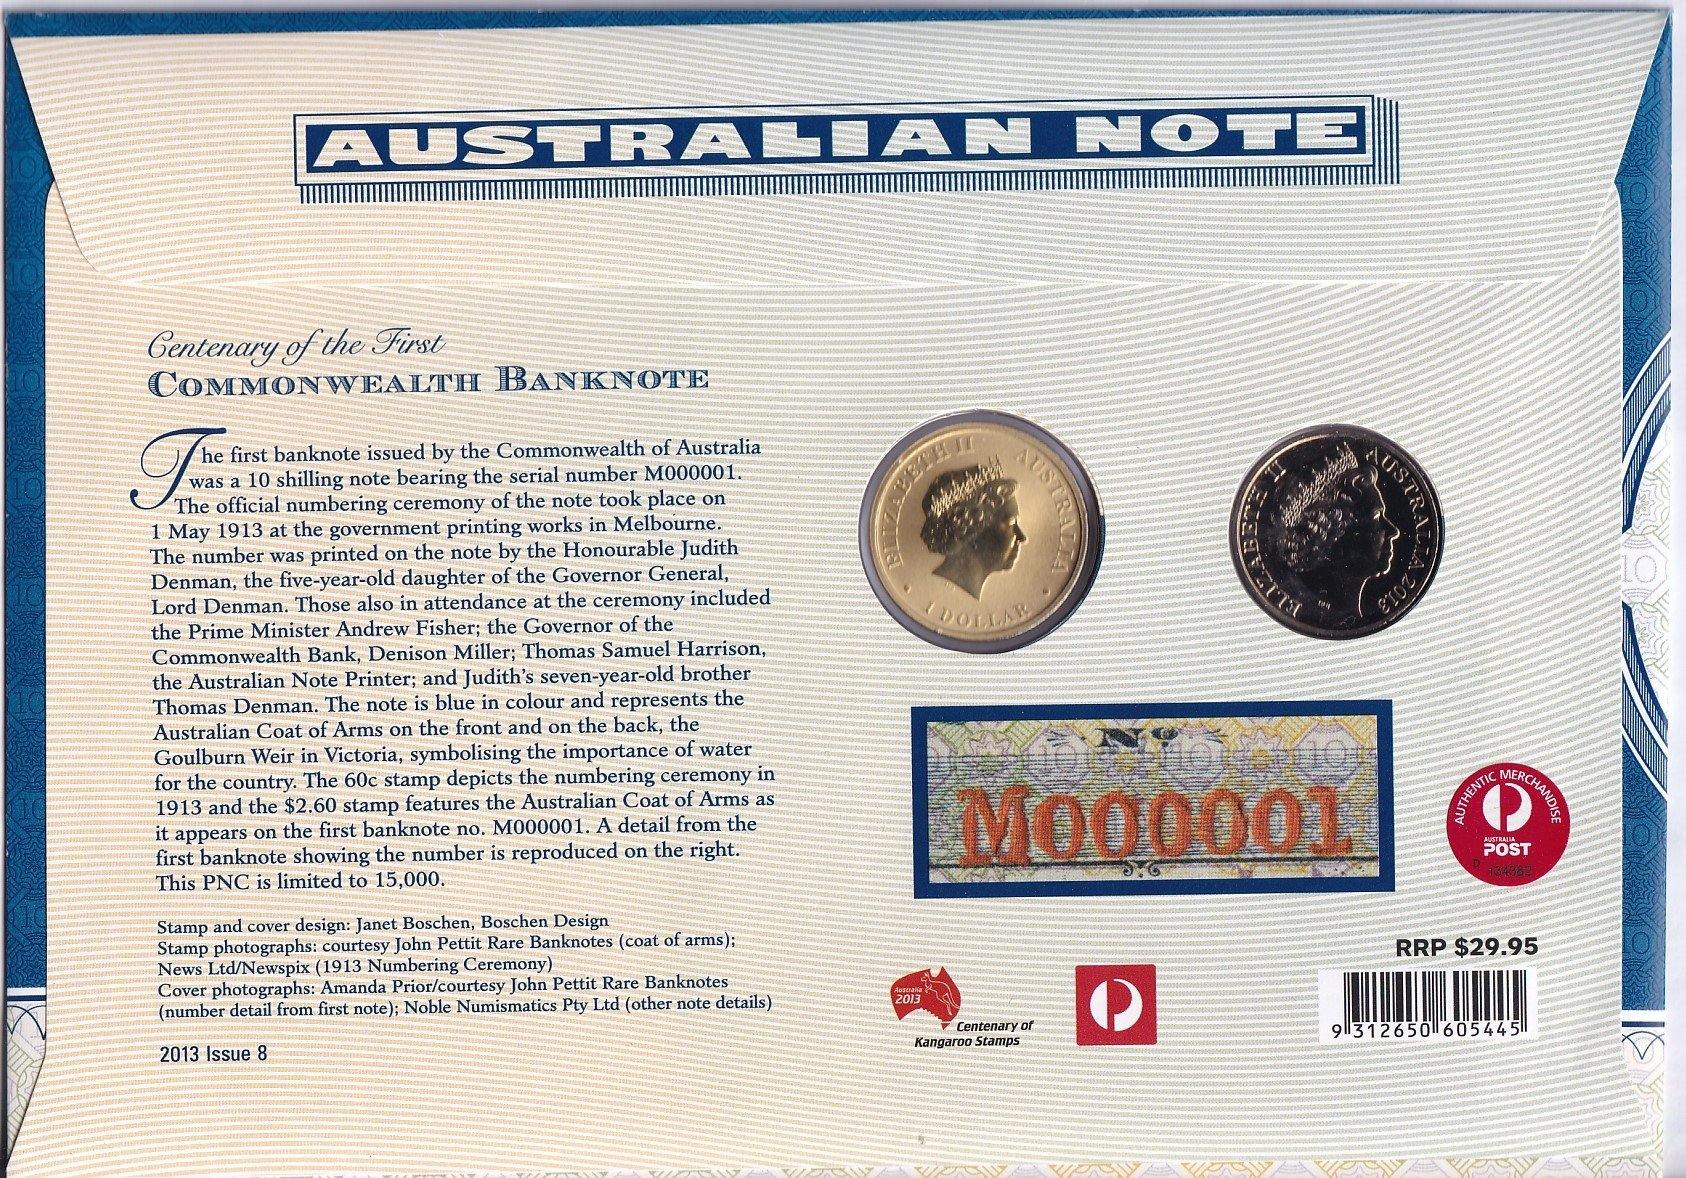 2013 Centenary of the First Commonwealth Banknote Stamp and Coins Cover PNC - Loose Change Coins